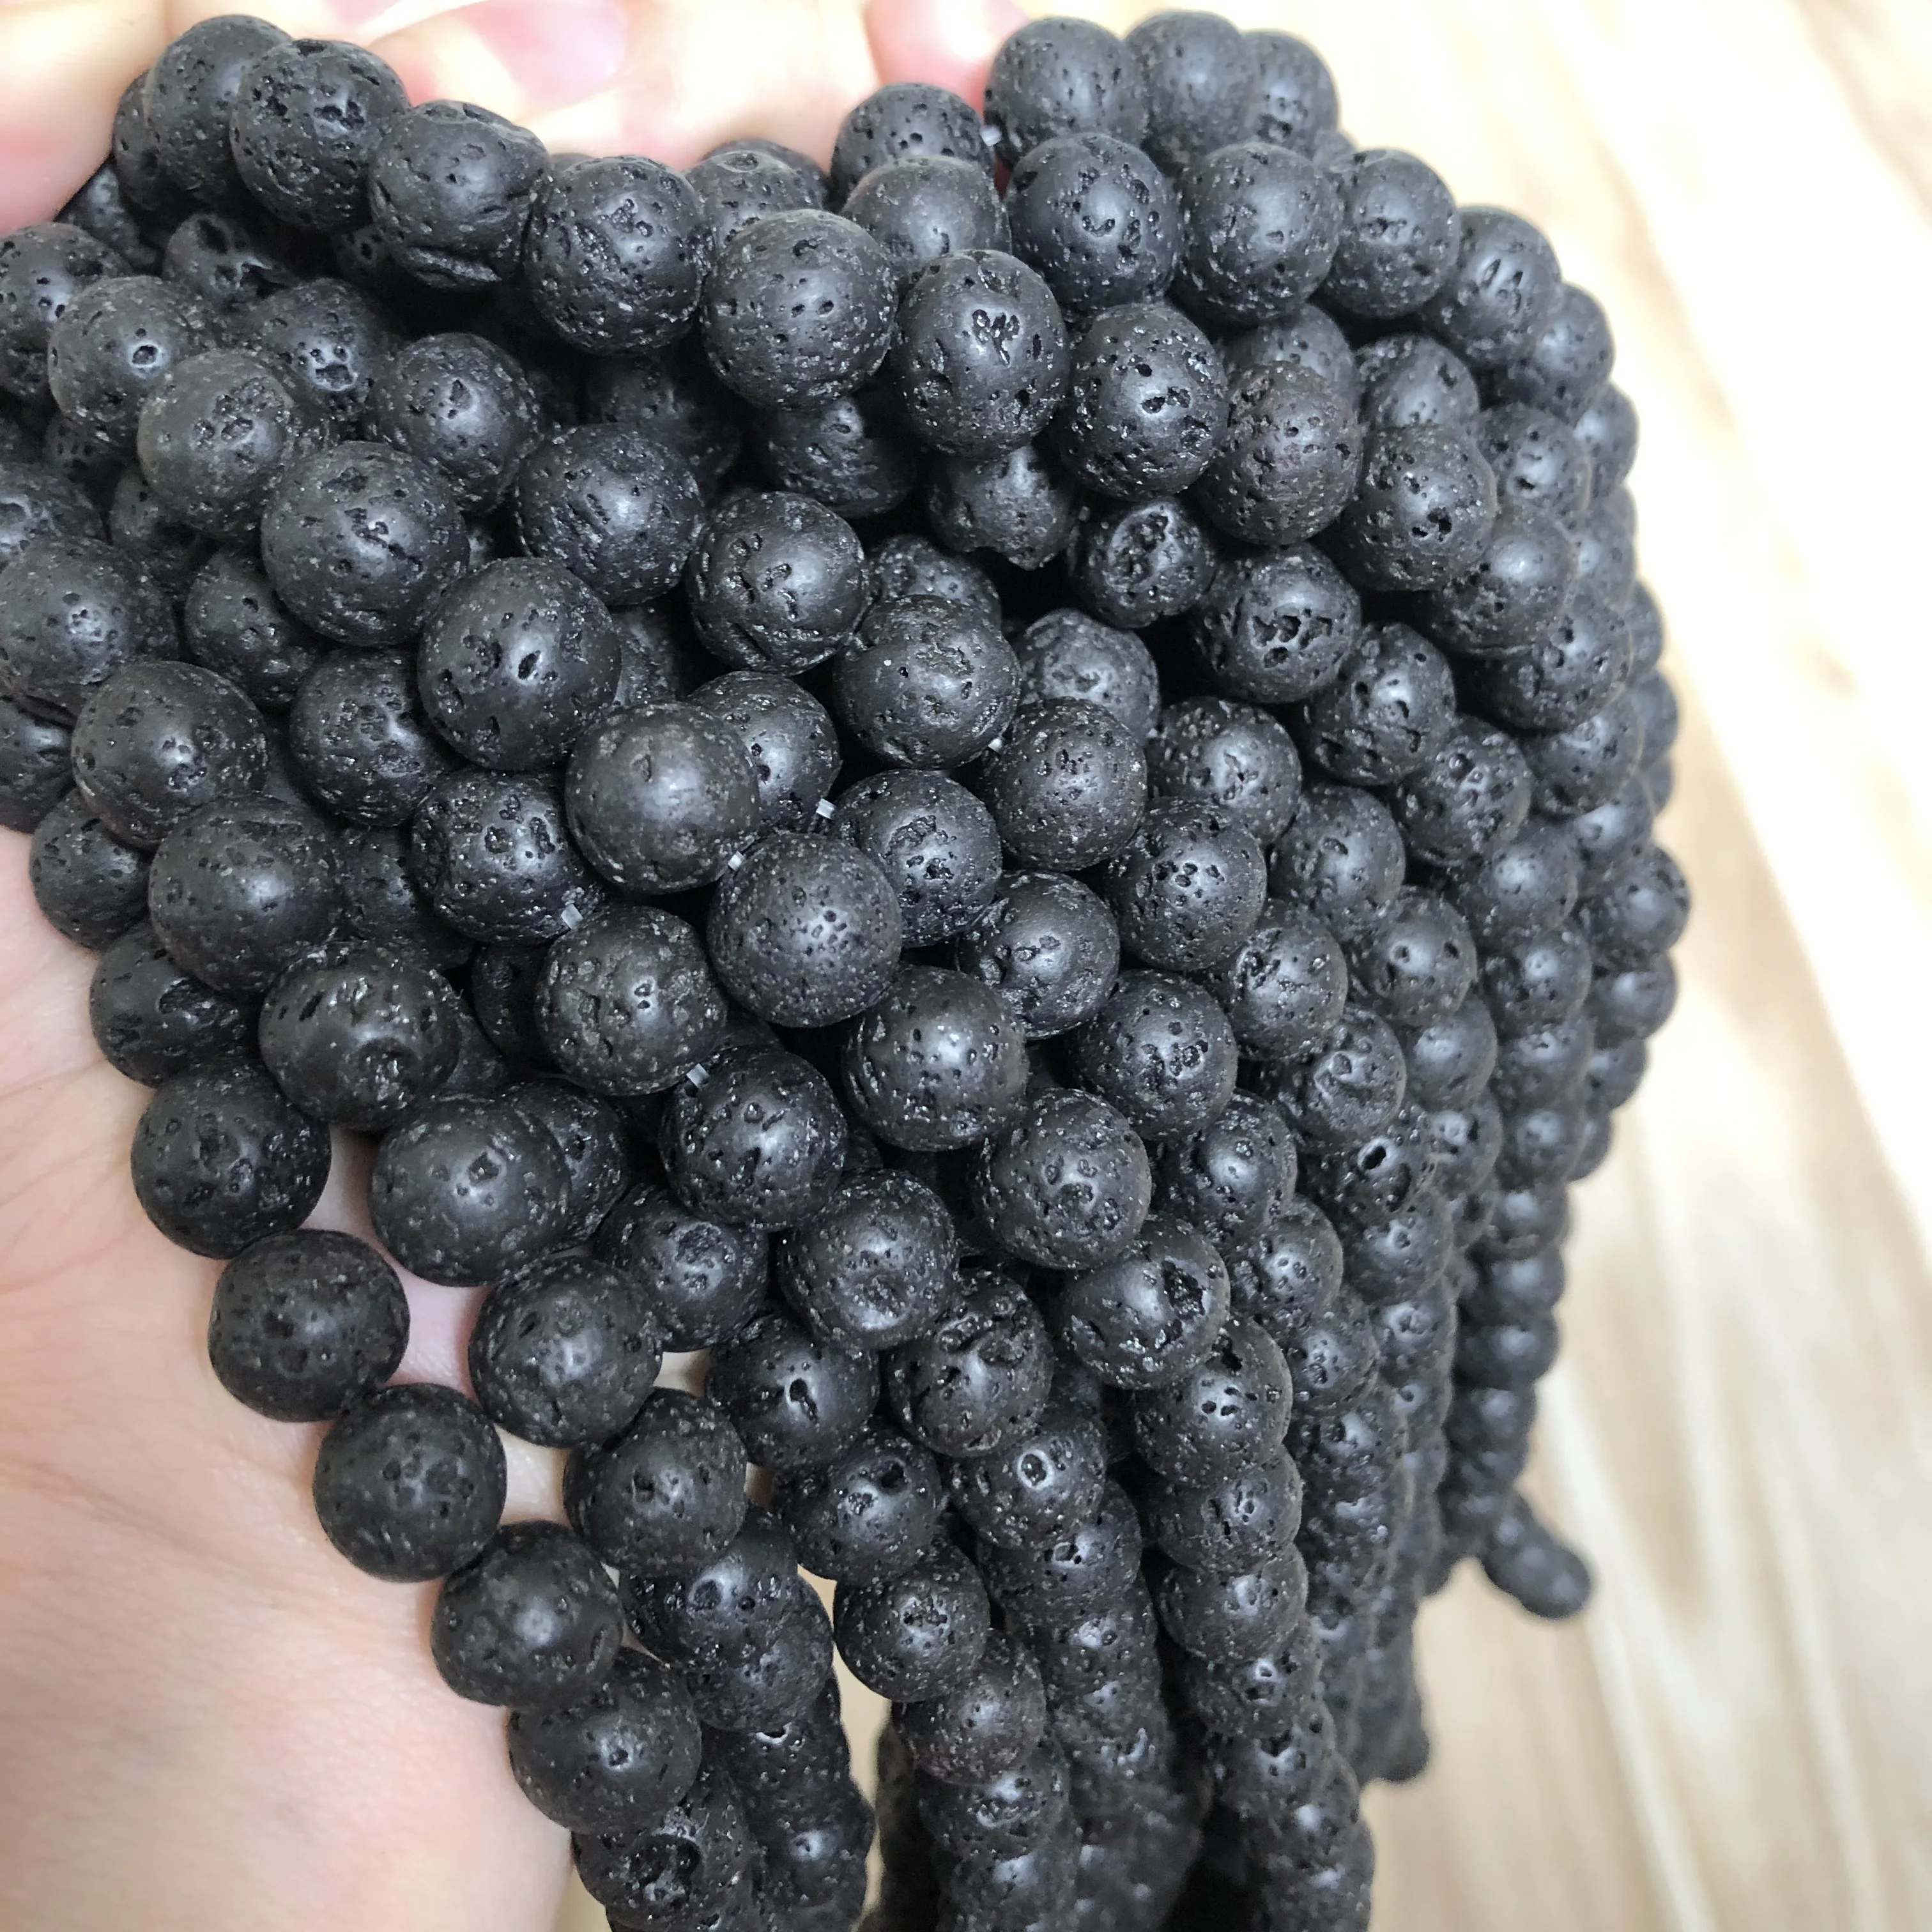 

Natural Black Volcanic Lava Stone Beads Round Loose Spacer Bead For Jewelry Making DIY Perles Bracelet Accessories 4 6 8 10 12mm